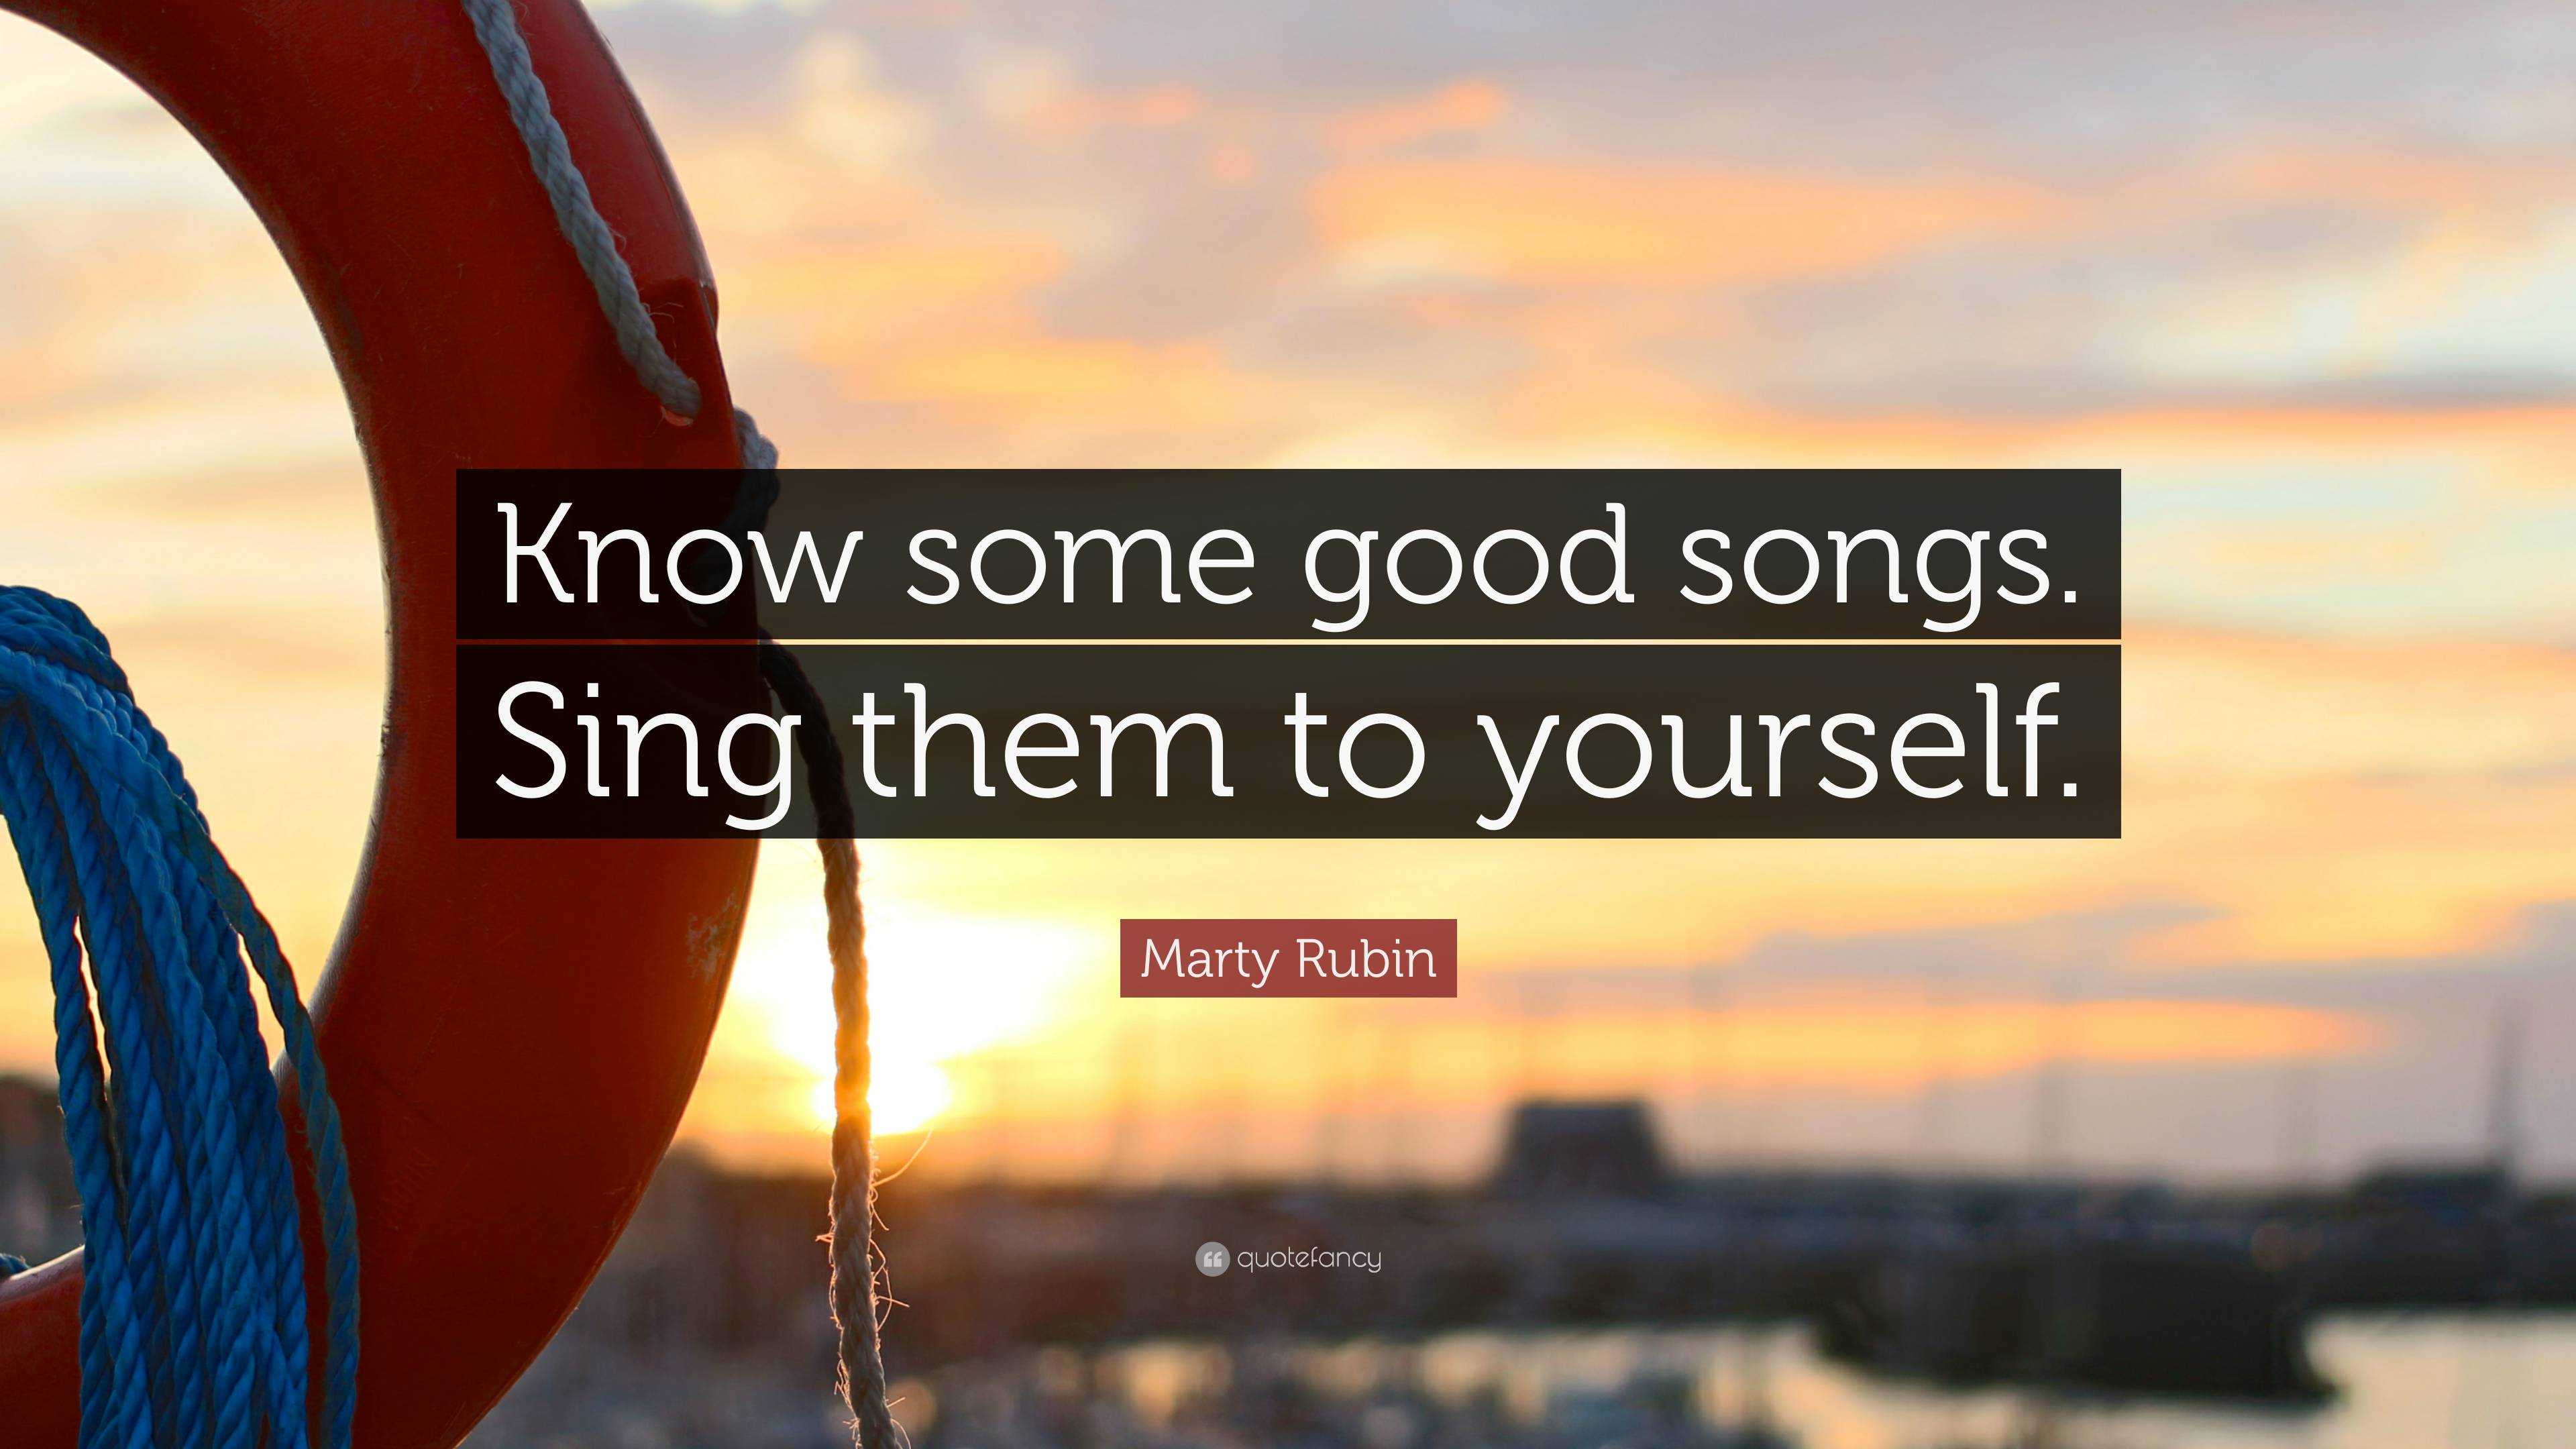 Marty Rubin Quote “Know some good songs. Sing them to yourself.”